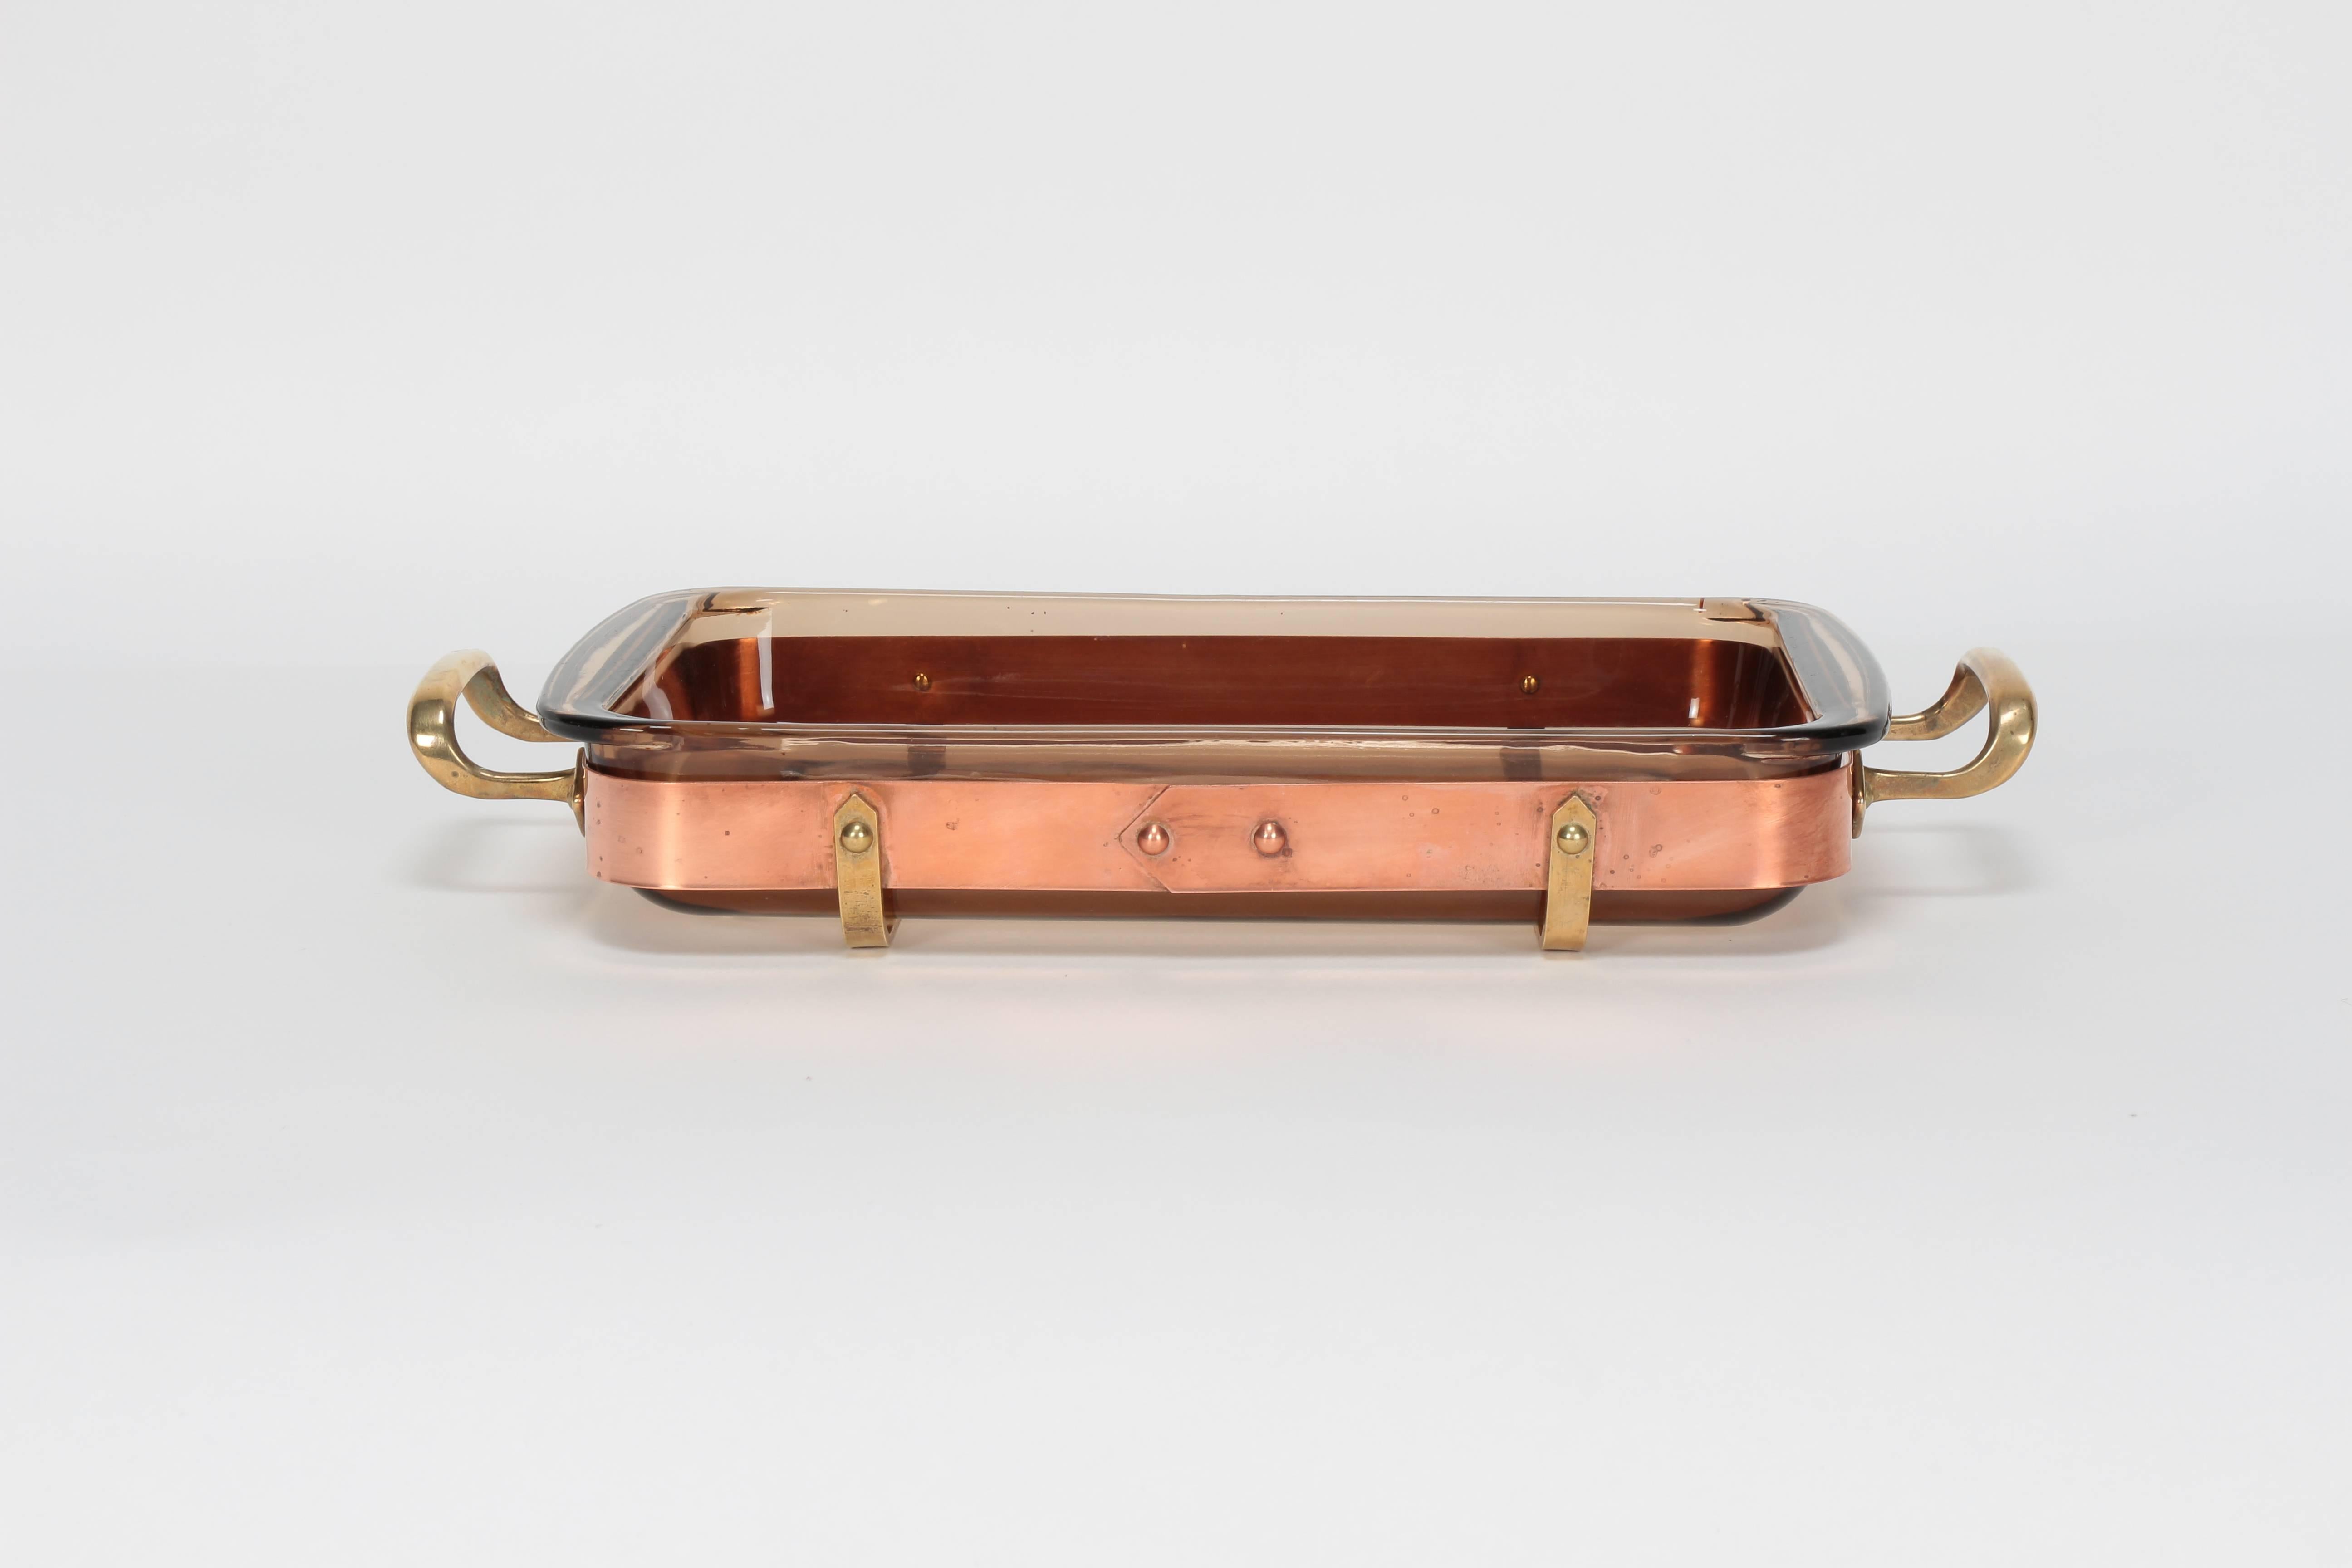 Swedish casserole dish manufactured by Nilsjohan in the 1970s. Beautiful handcrafted copper frame and brass handles. The heat proof glass bowl from Pyrex can contain two litres and is removable.